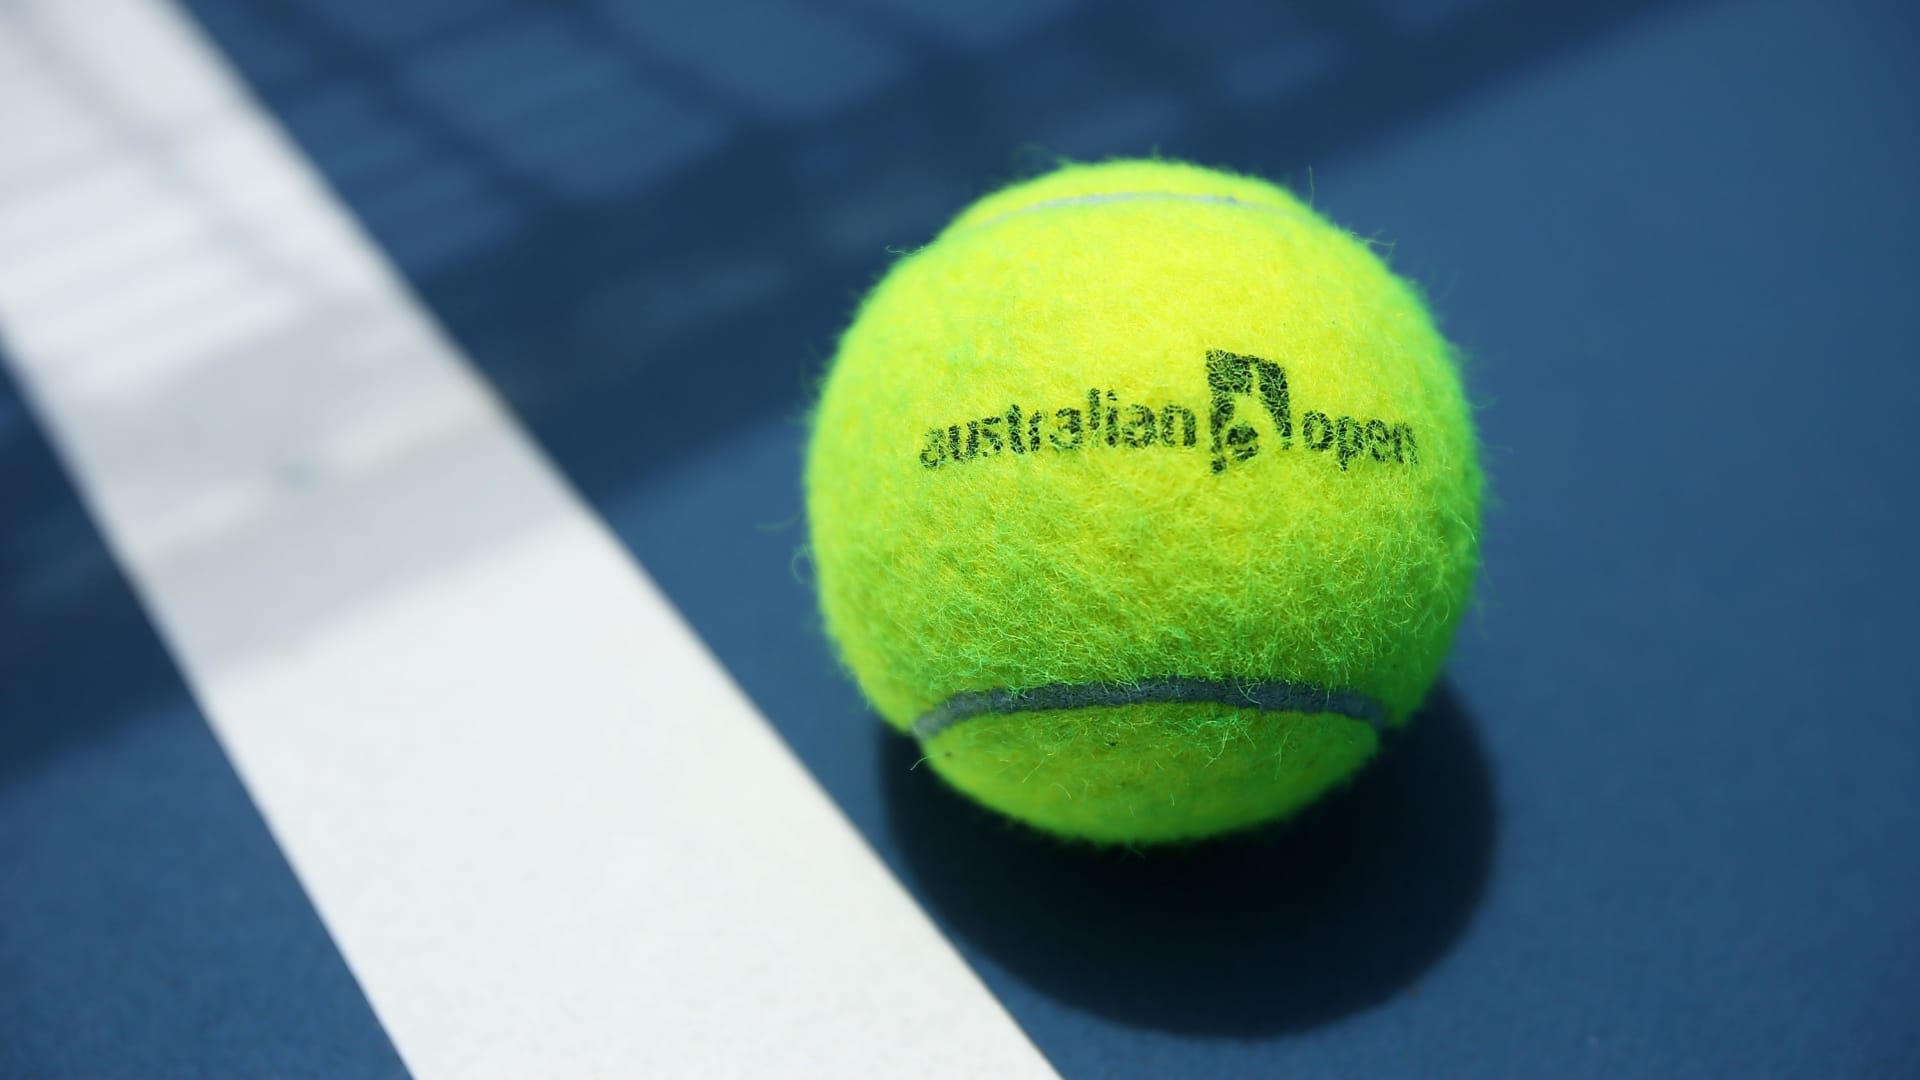 In this file photo an Australian Open branded tennis ball is seen on court ahead of the 2015 Australian Open at Melbourne Park on January 11, 2015 in Melbourne, Australia.